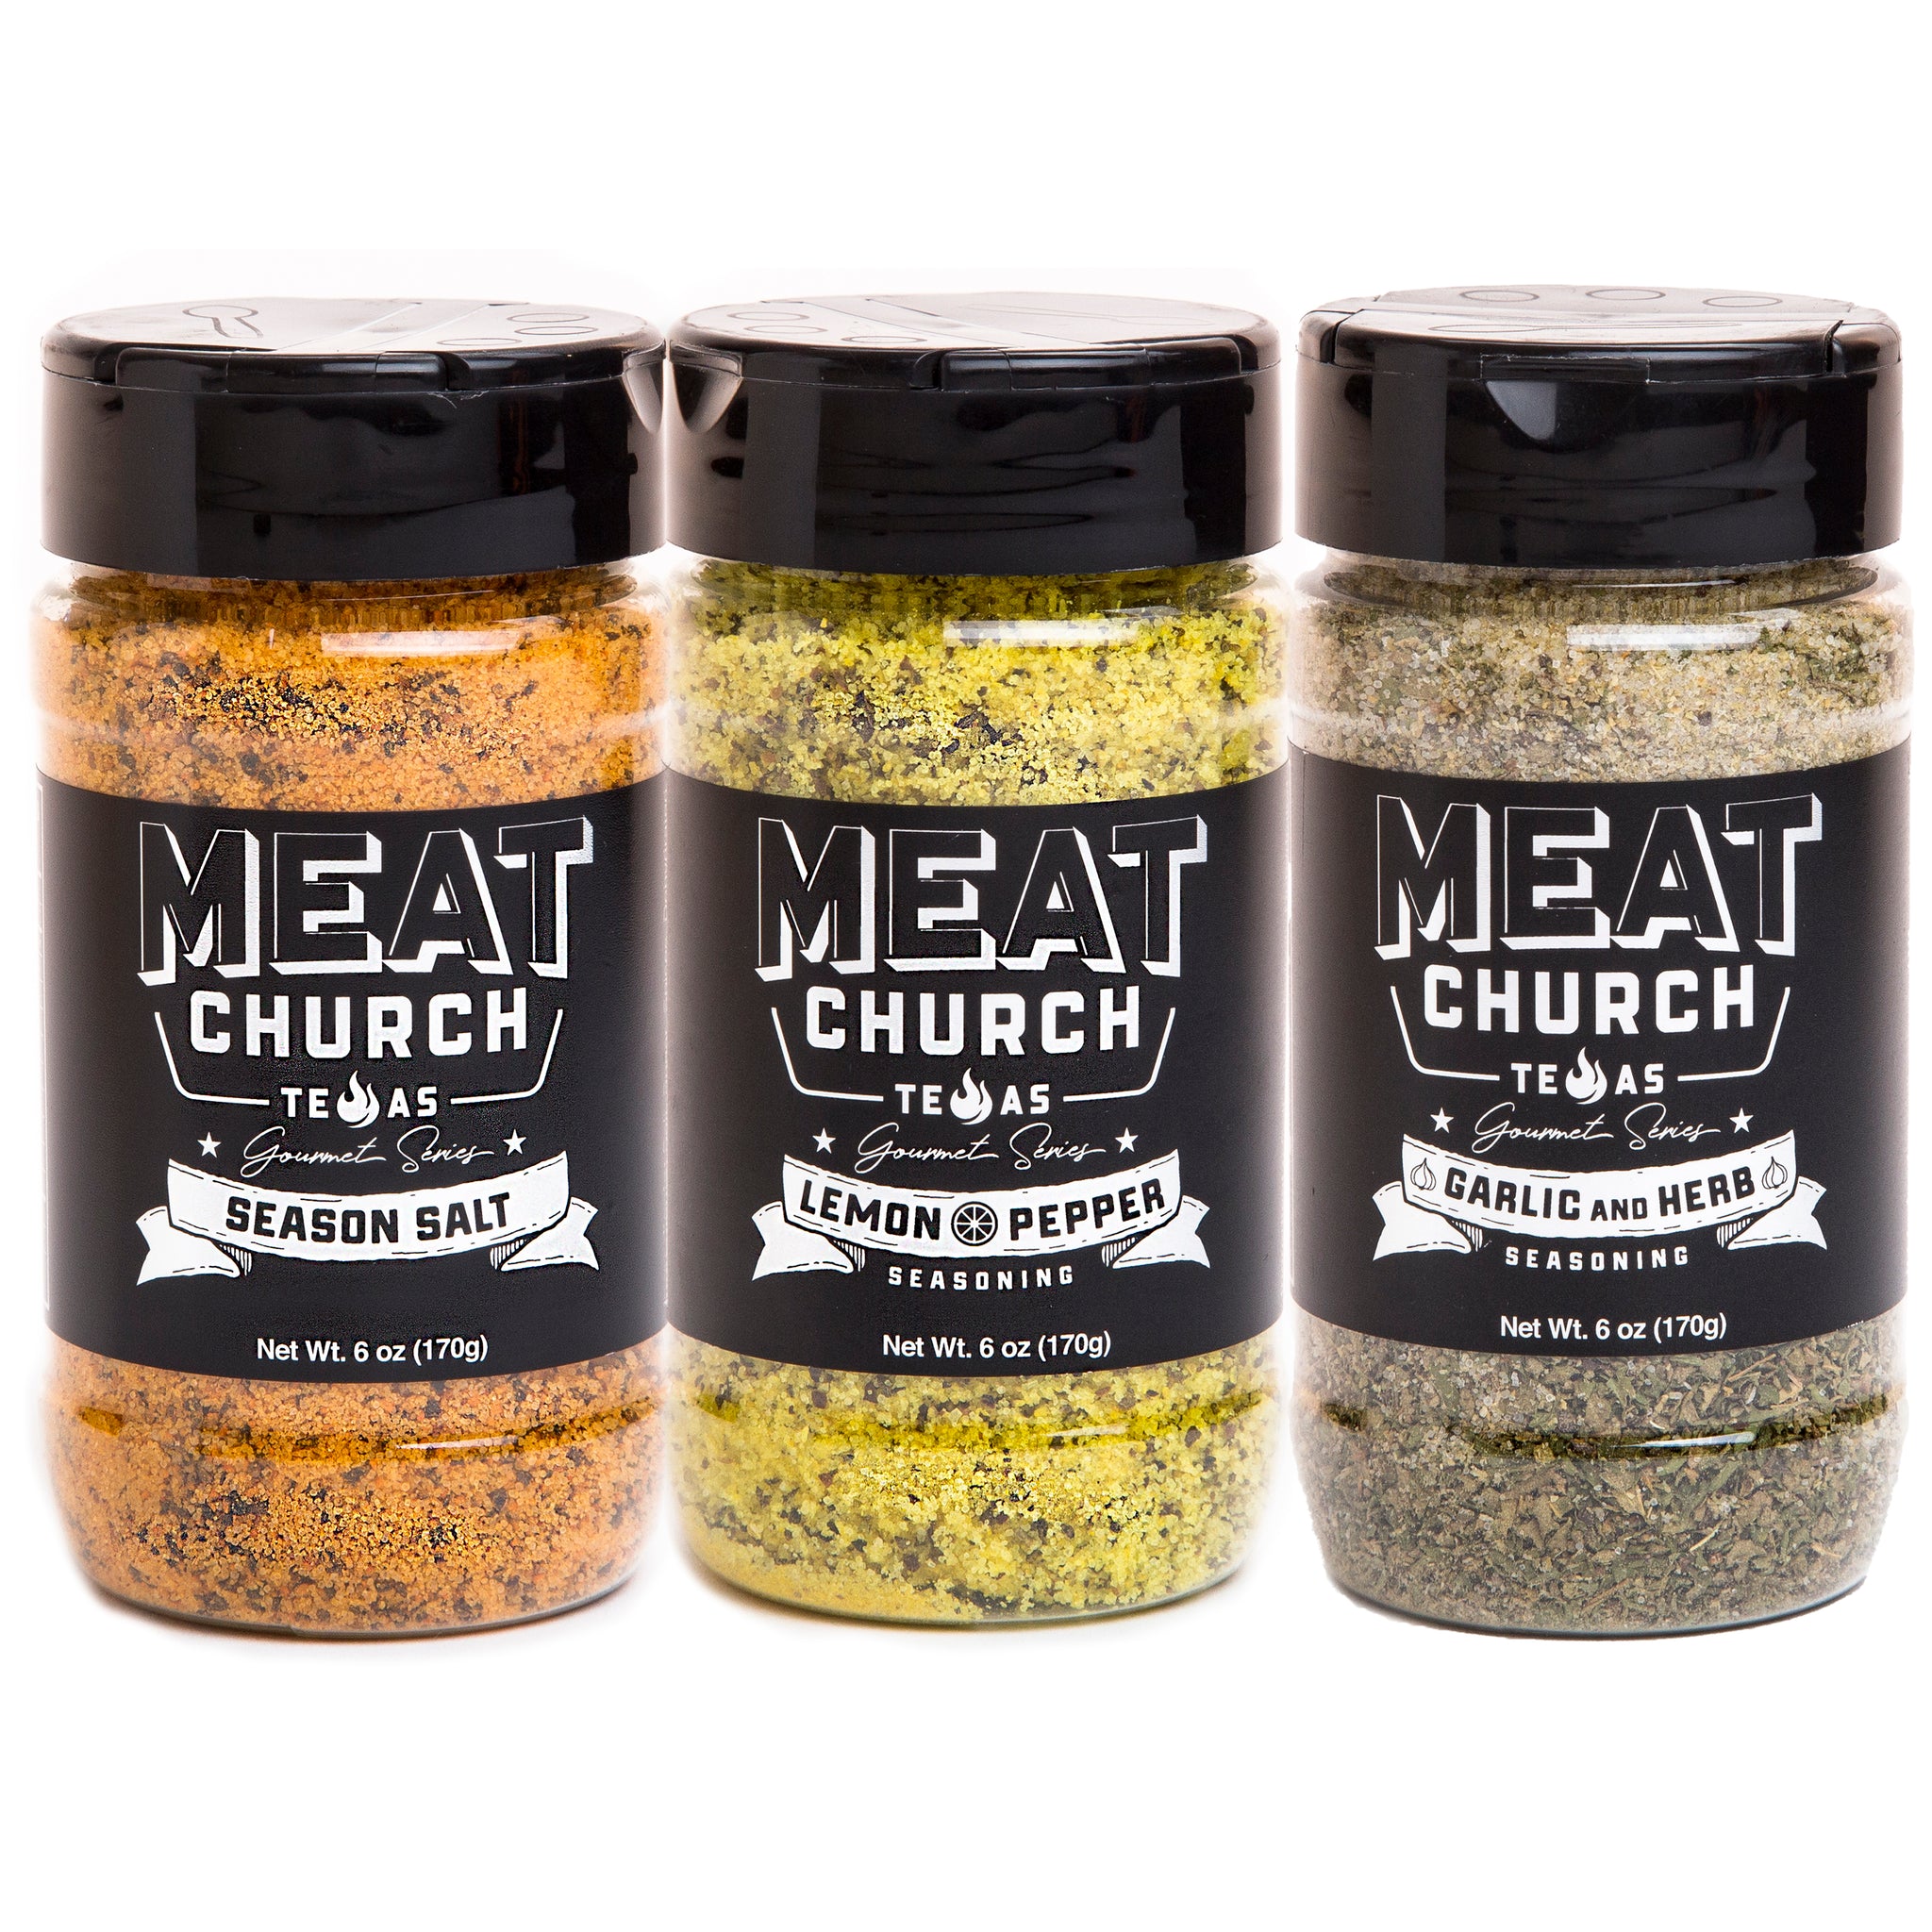 The Gourmet Holy – Meat Church